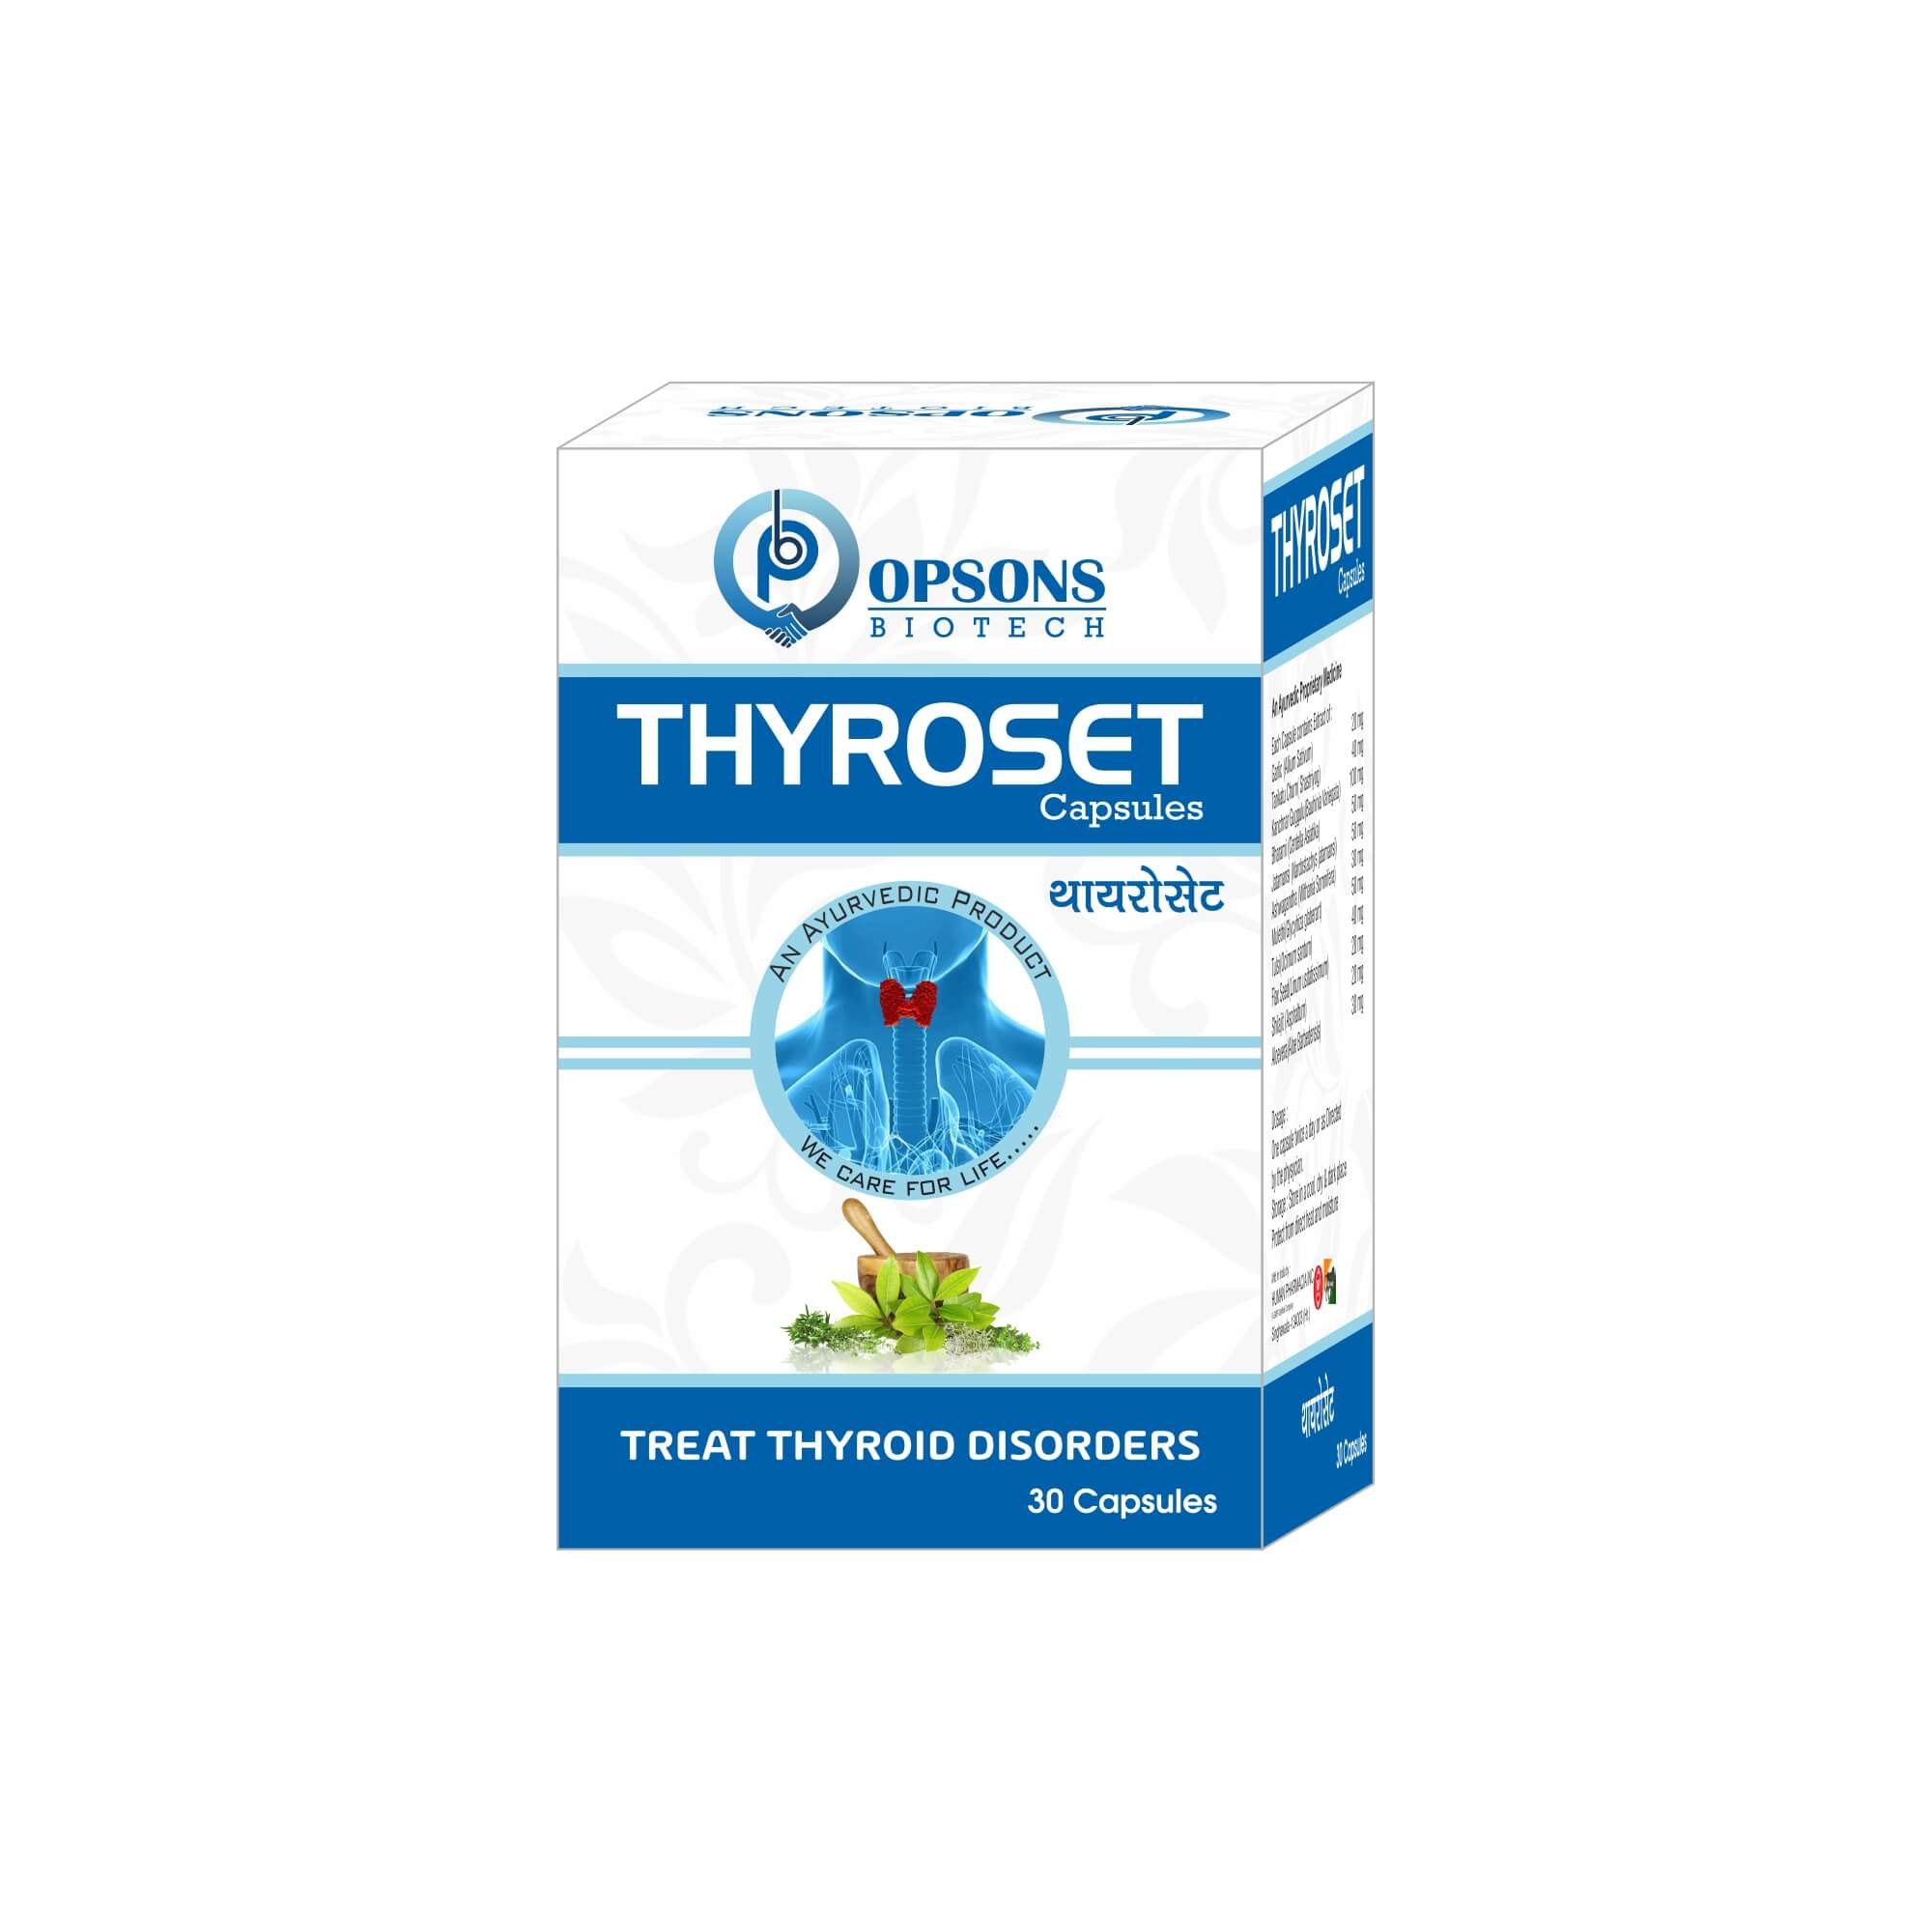 Product Name: Thyroset capsules, Compositions of Thyroset capsules are Treat Thyroid Disorders - Opsons Biotech